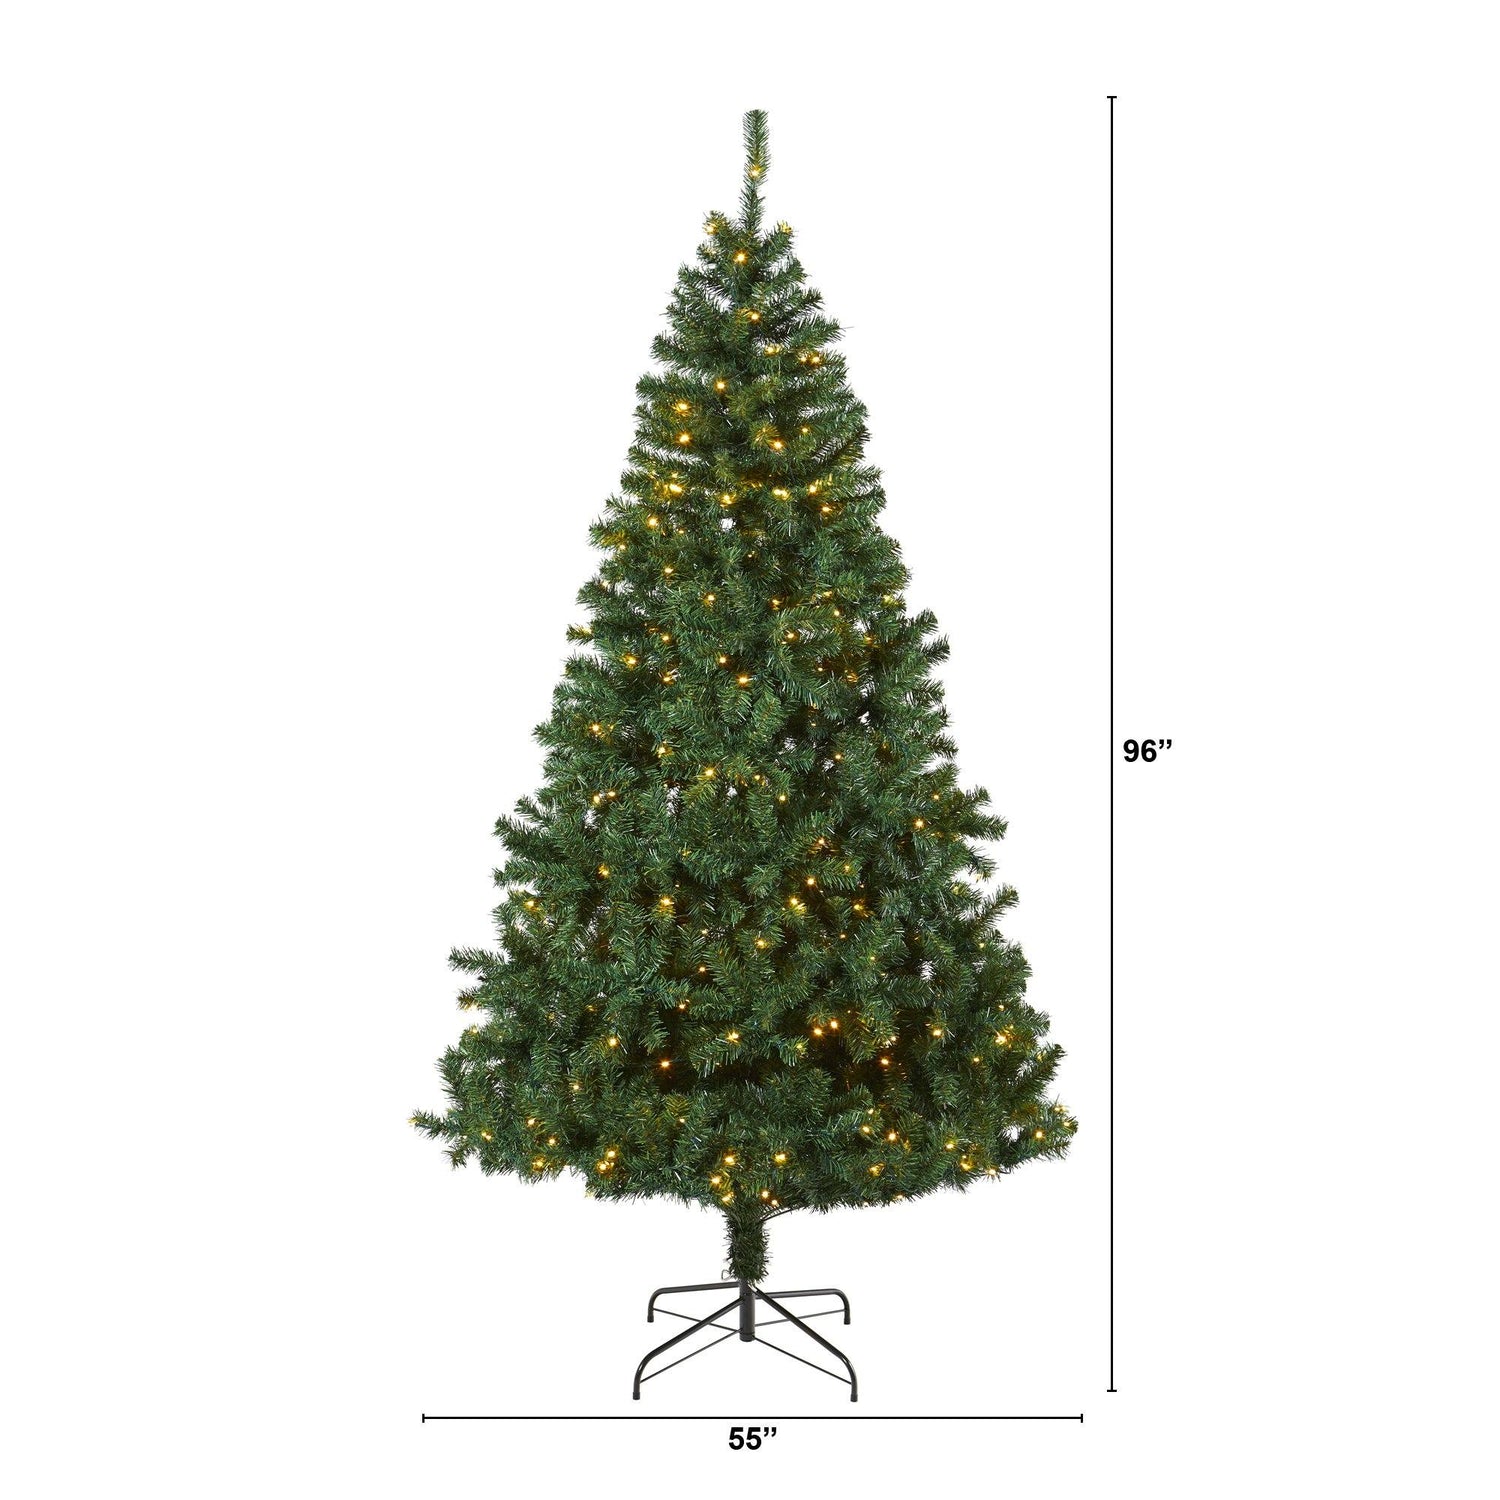 8' Northern Tip Artificial Christmas Tree with 450 Clear LED Lights